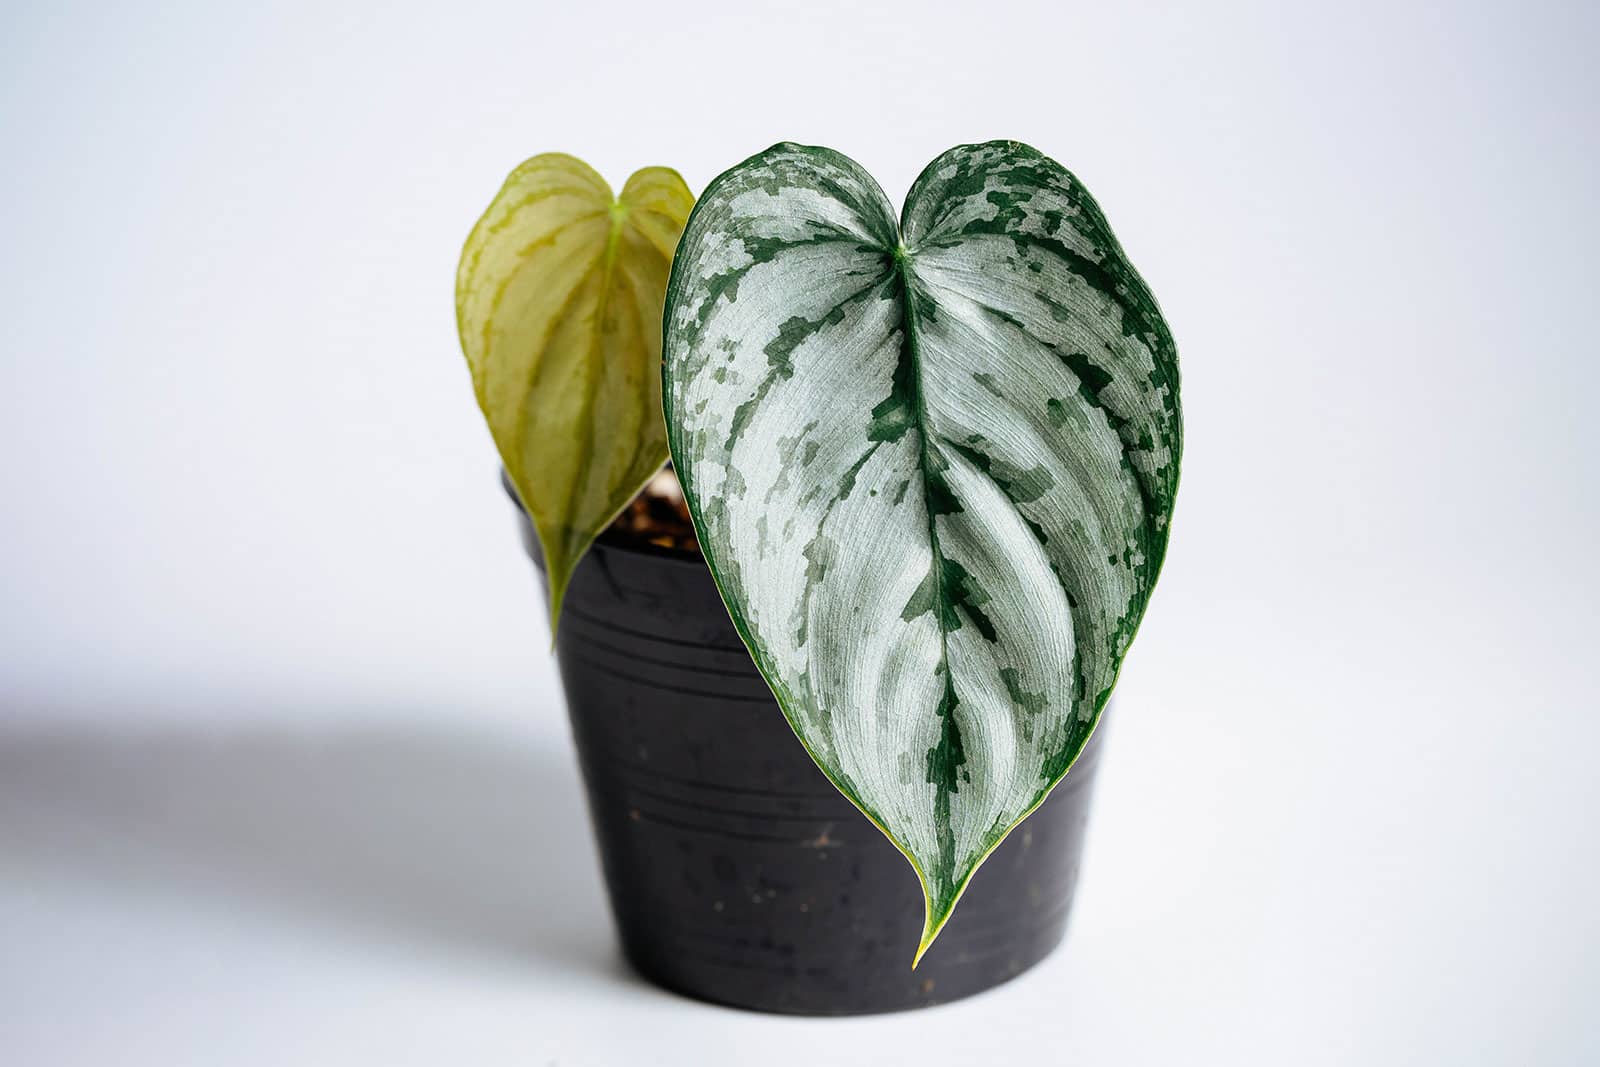 A large green and silver mottled leaf on a young Philodendron brandtianum plant, seen in a black plastic pot against a white backdrop